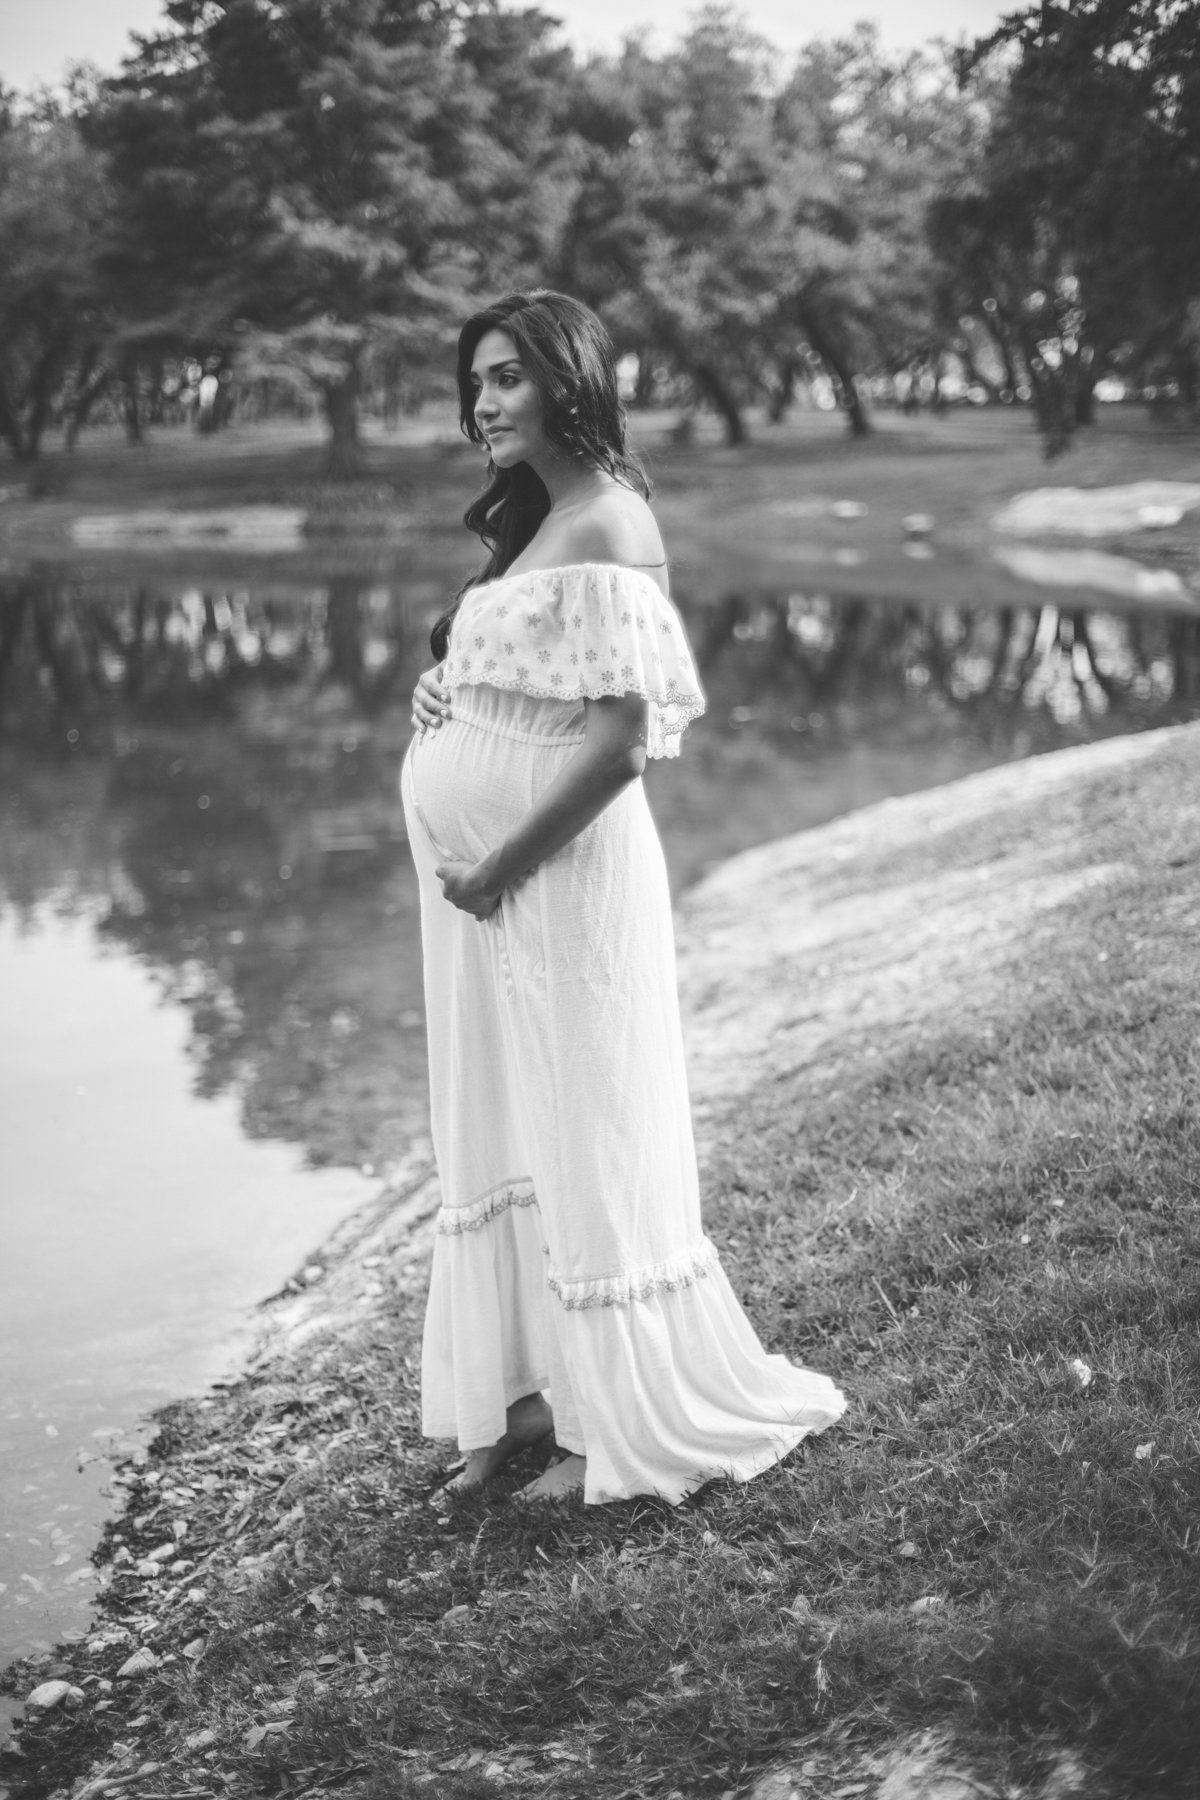 Maternity photography session of pregnant woman in white see through maternity dress standing next to lake.